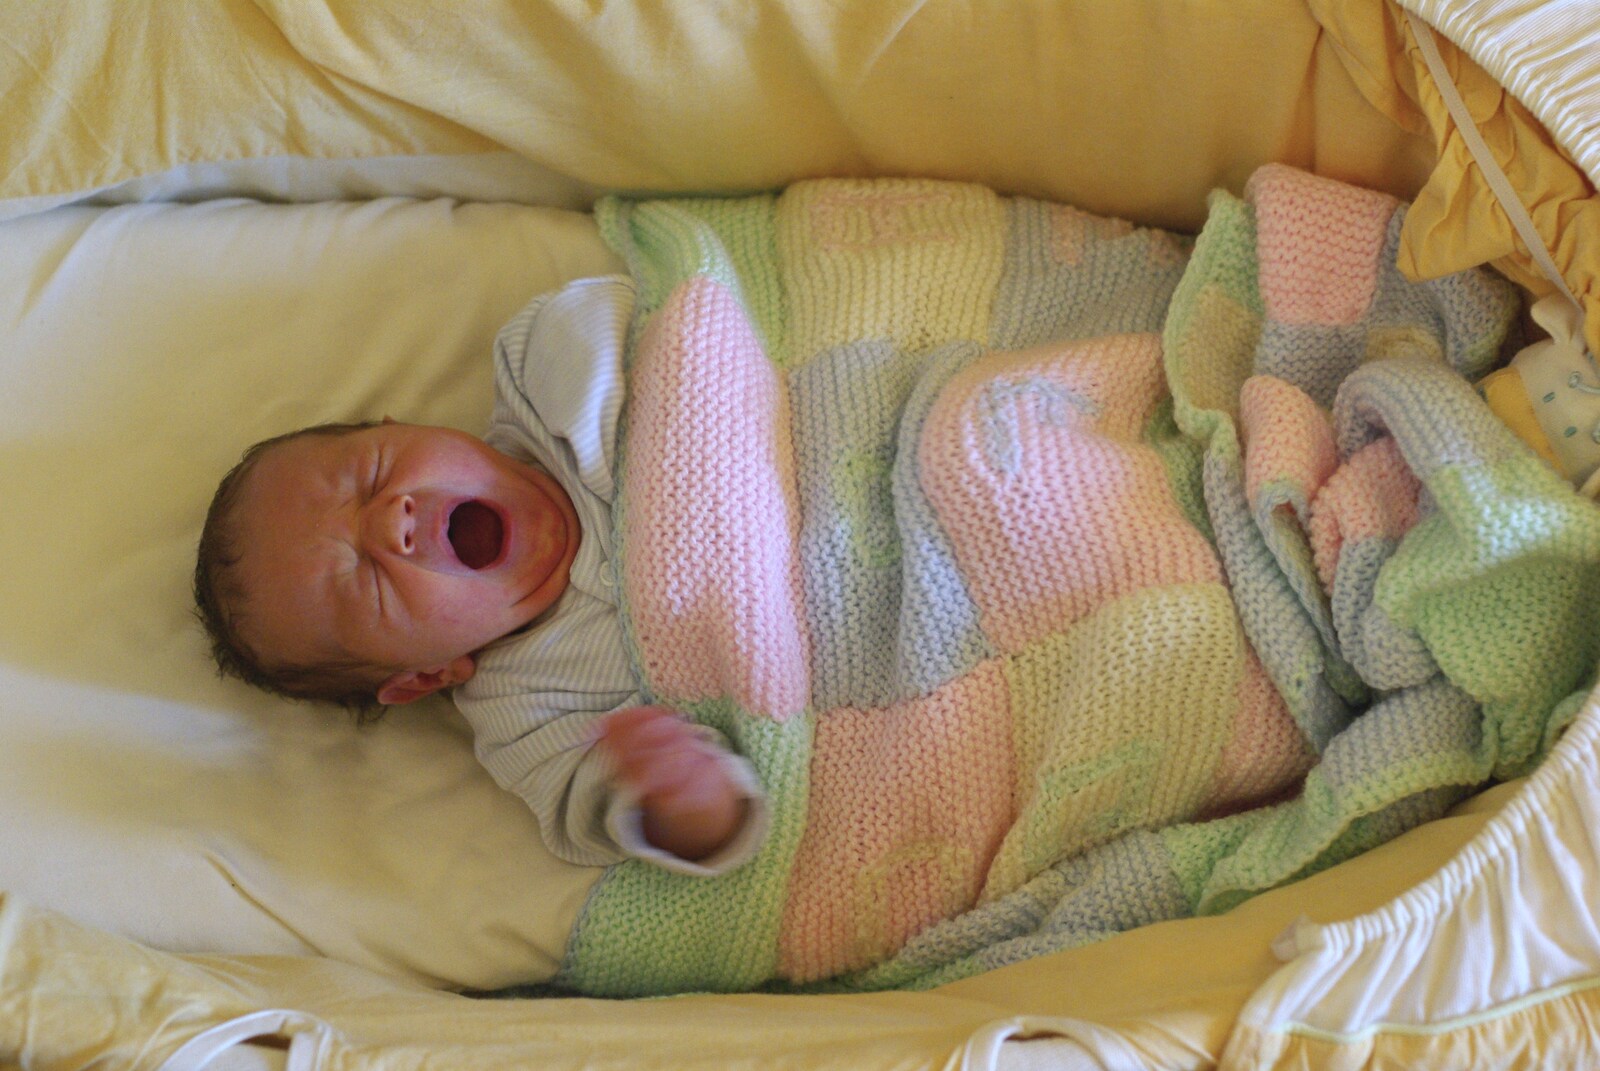 Sprogday: Nosher and Isobel Become Parents, The Rosie, Cambridge - 25th September 2008: A big yawn: nestling under a blanket knitted by Spammy